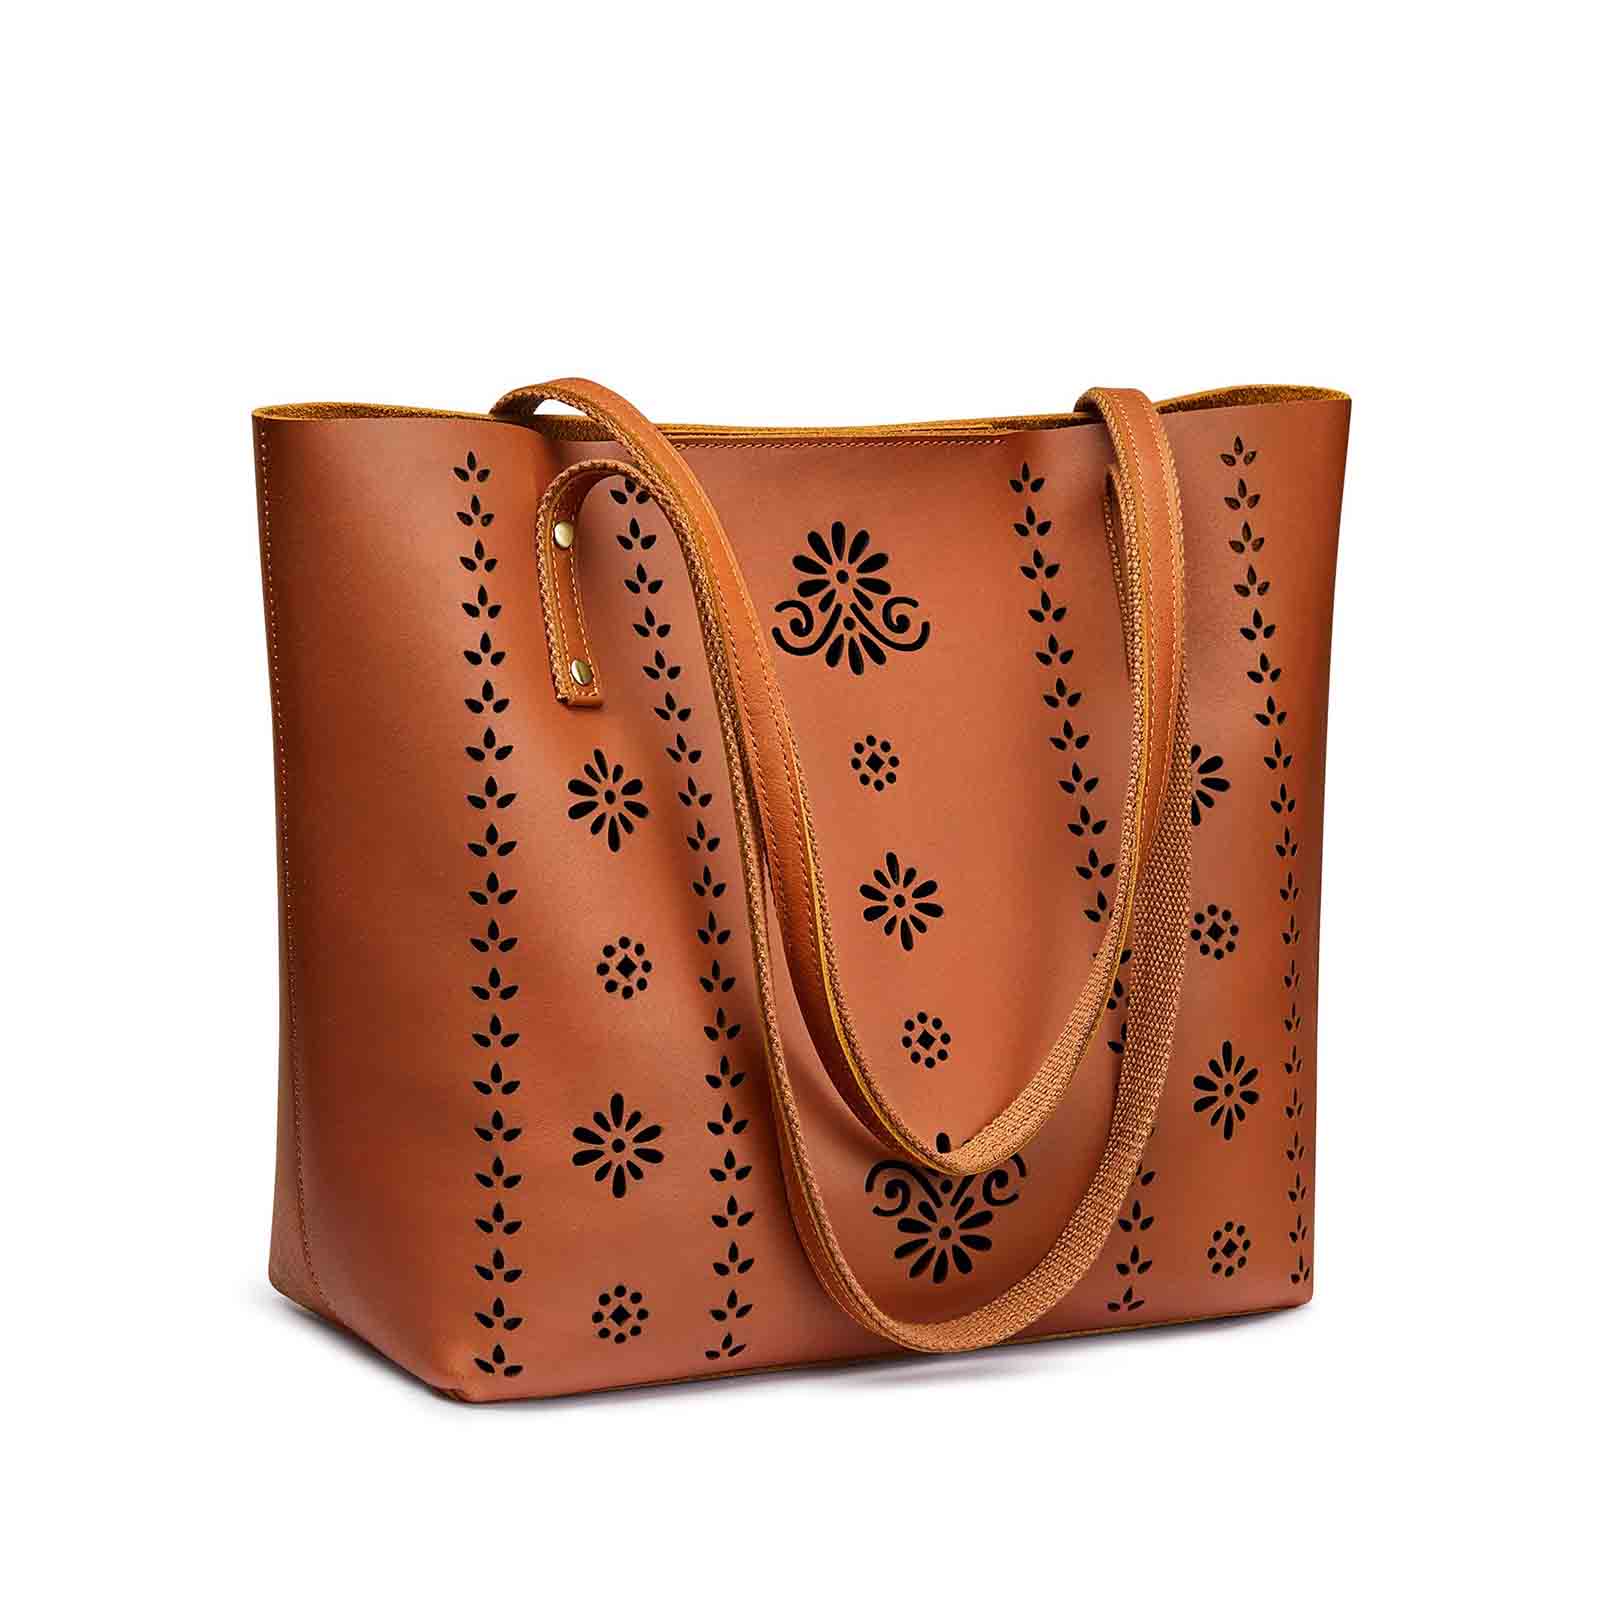 Vintage Genuine leather Tote bags with Cut-Out Detailing